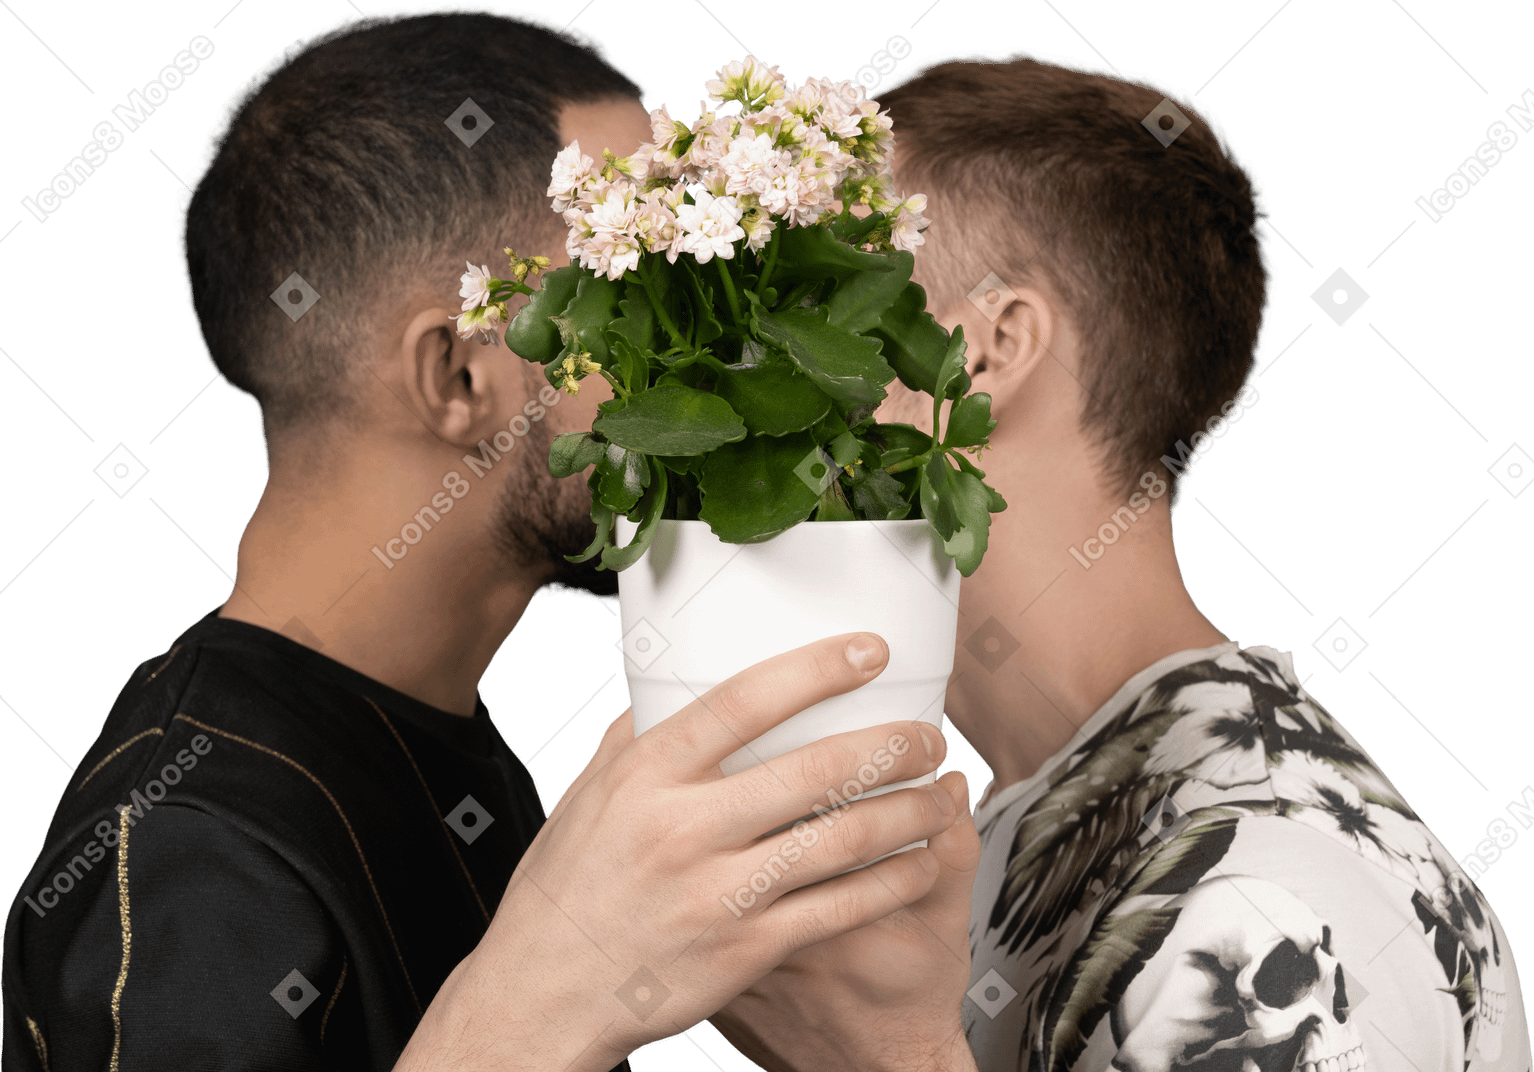 Close-up of two young man holding a flower pot to cover their faces